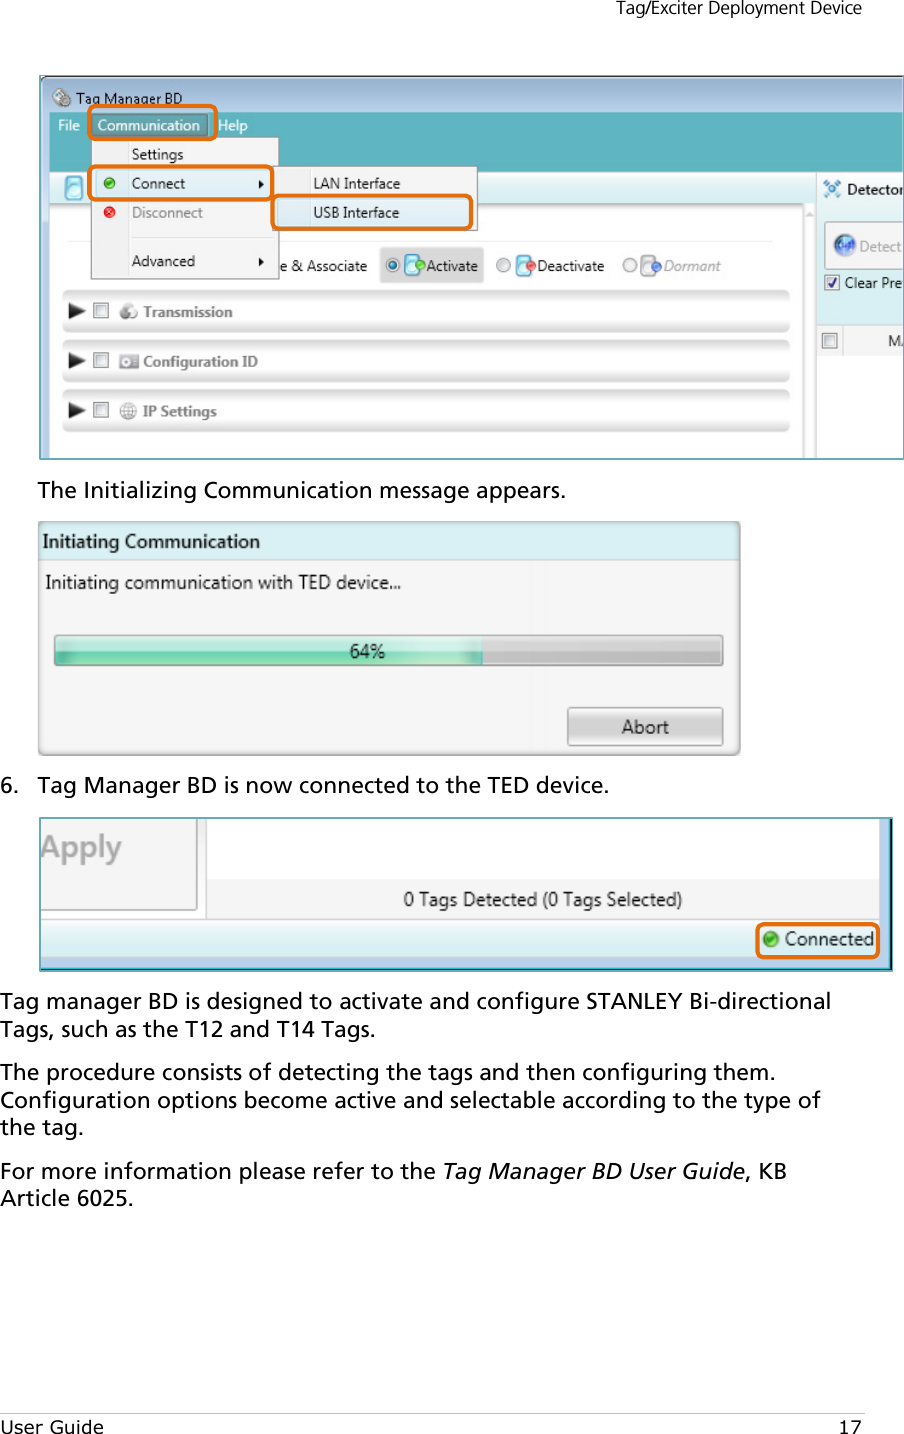 Tag/Exciter Deployment Device User Guide 17  The Initializing Communication message appears.    Tag Manager BD is now connected to the TED device. 6. Tag manager BD is designed to activate and configure STANLEY Bi-directional Tags, such as the T12 and T14 Tags. The procedure consists of detecting the tags and then configuring them. Configuration options become active and selectable according to the type of the tag. For more information please refer to the Tag Manager BD User Guide, KB Article 6025.    